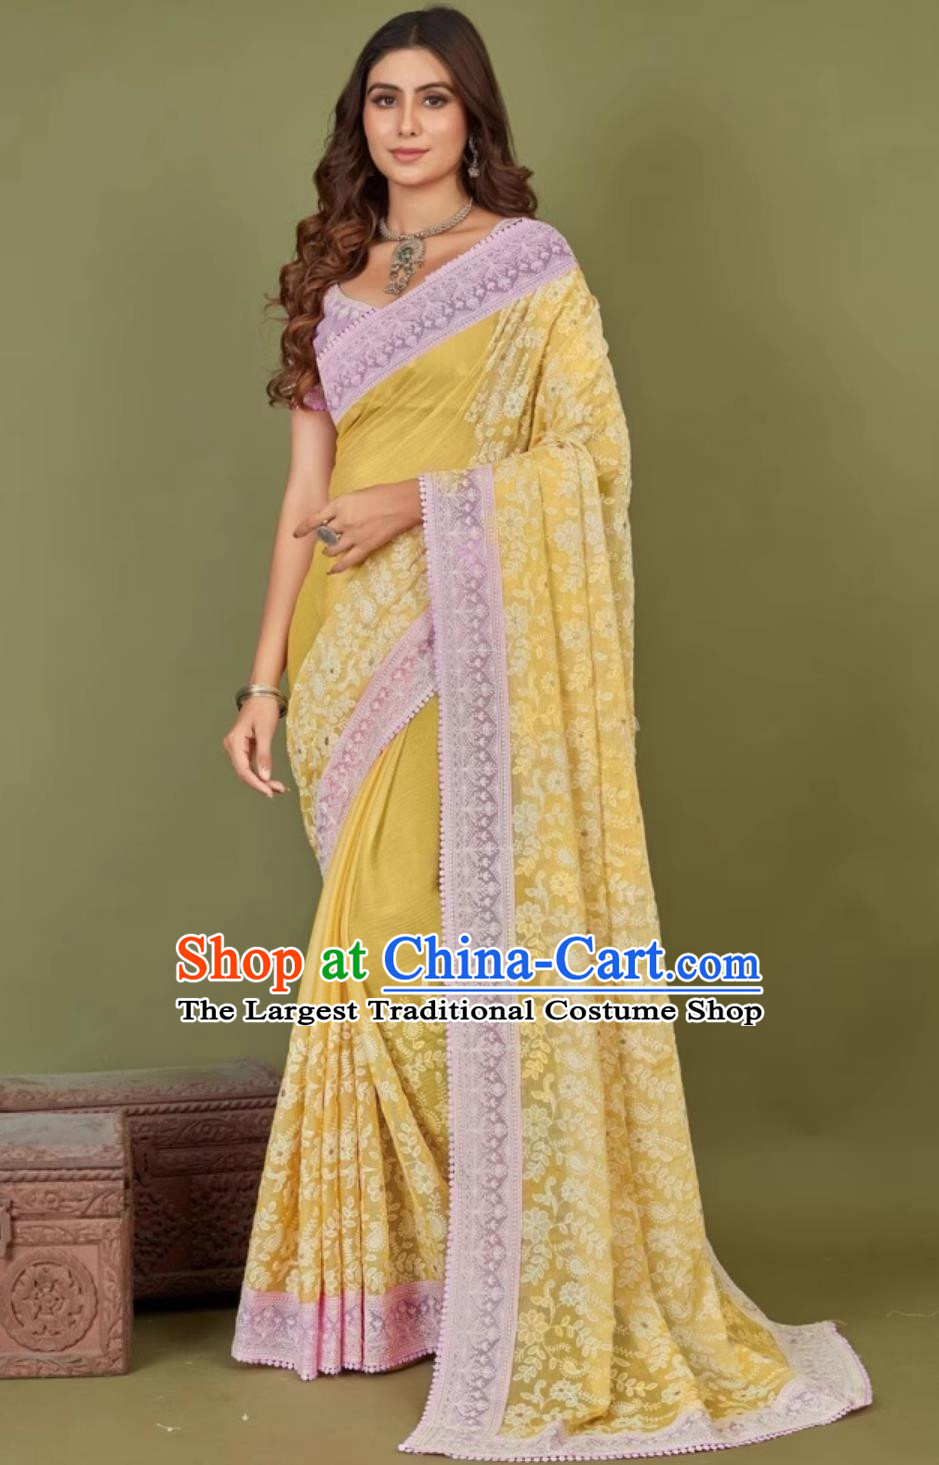 India Woman Summer Costume Indian National Clothing Traditional Festival Yellow Embroidered Sari Dress